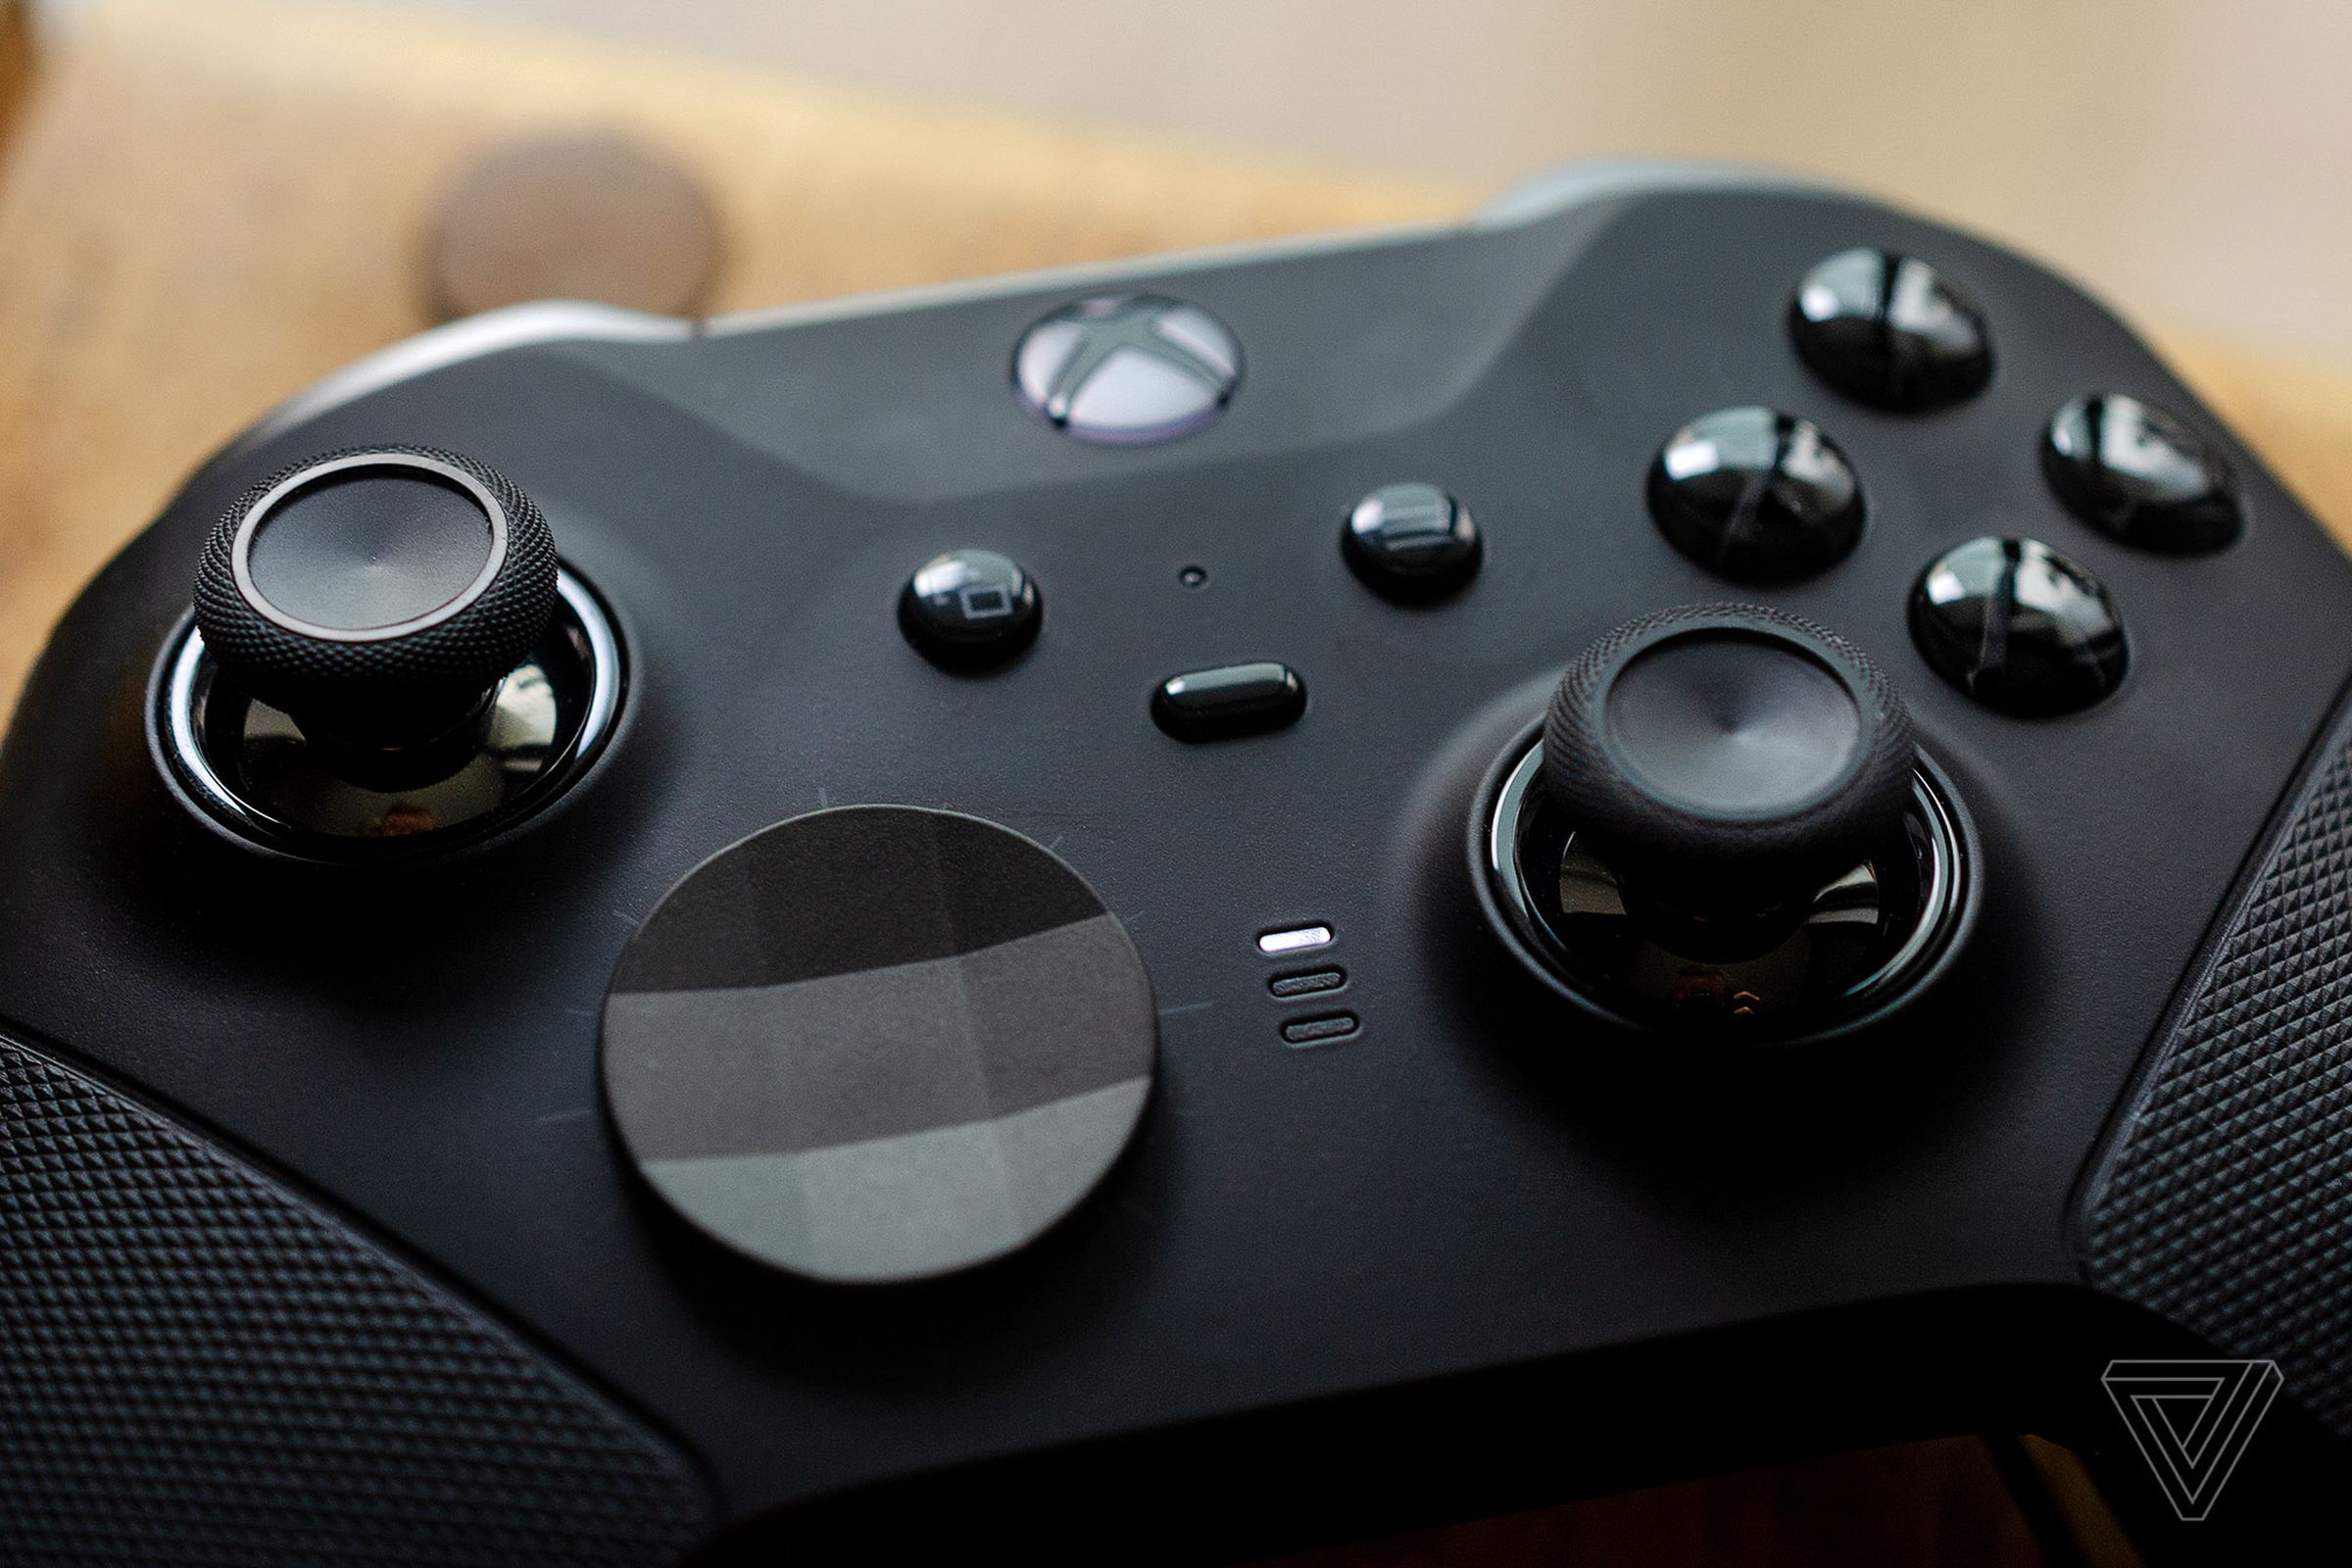 A photo showing the Elite 2 controller